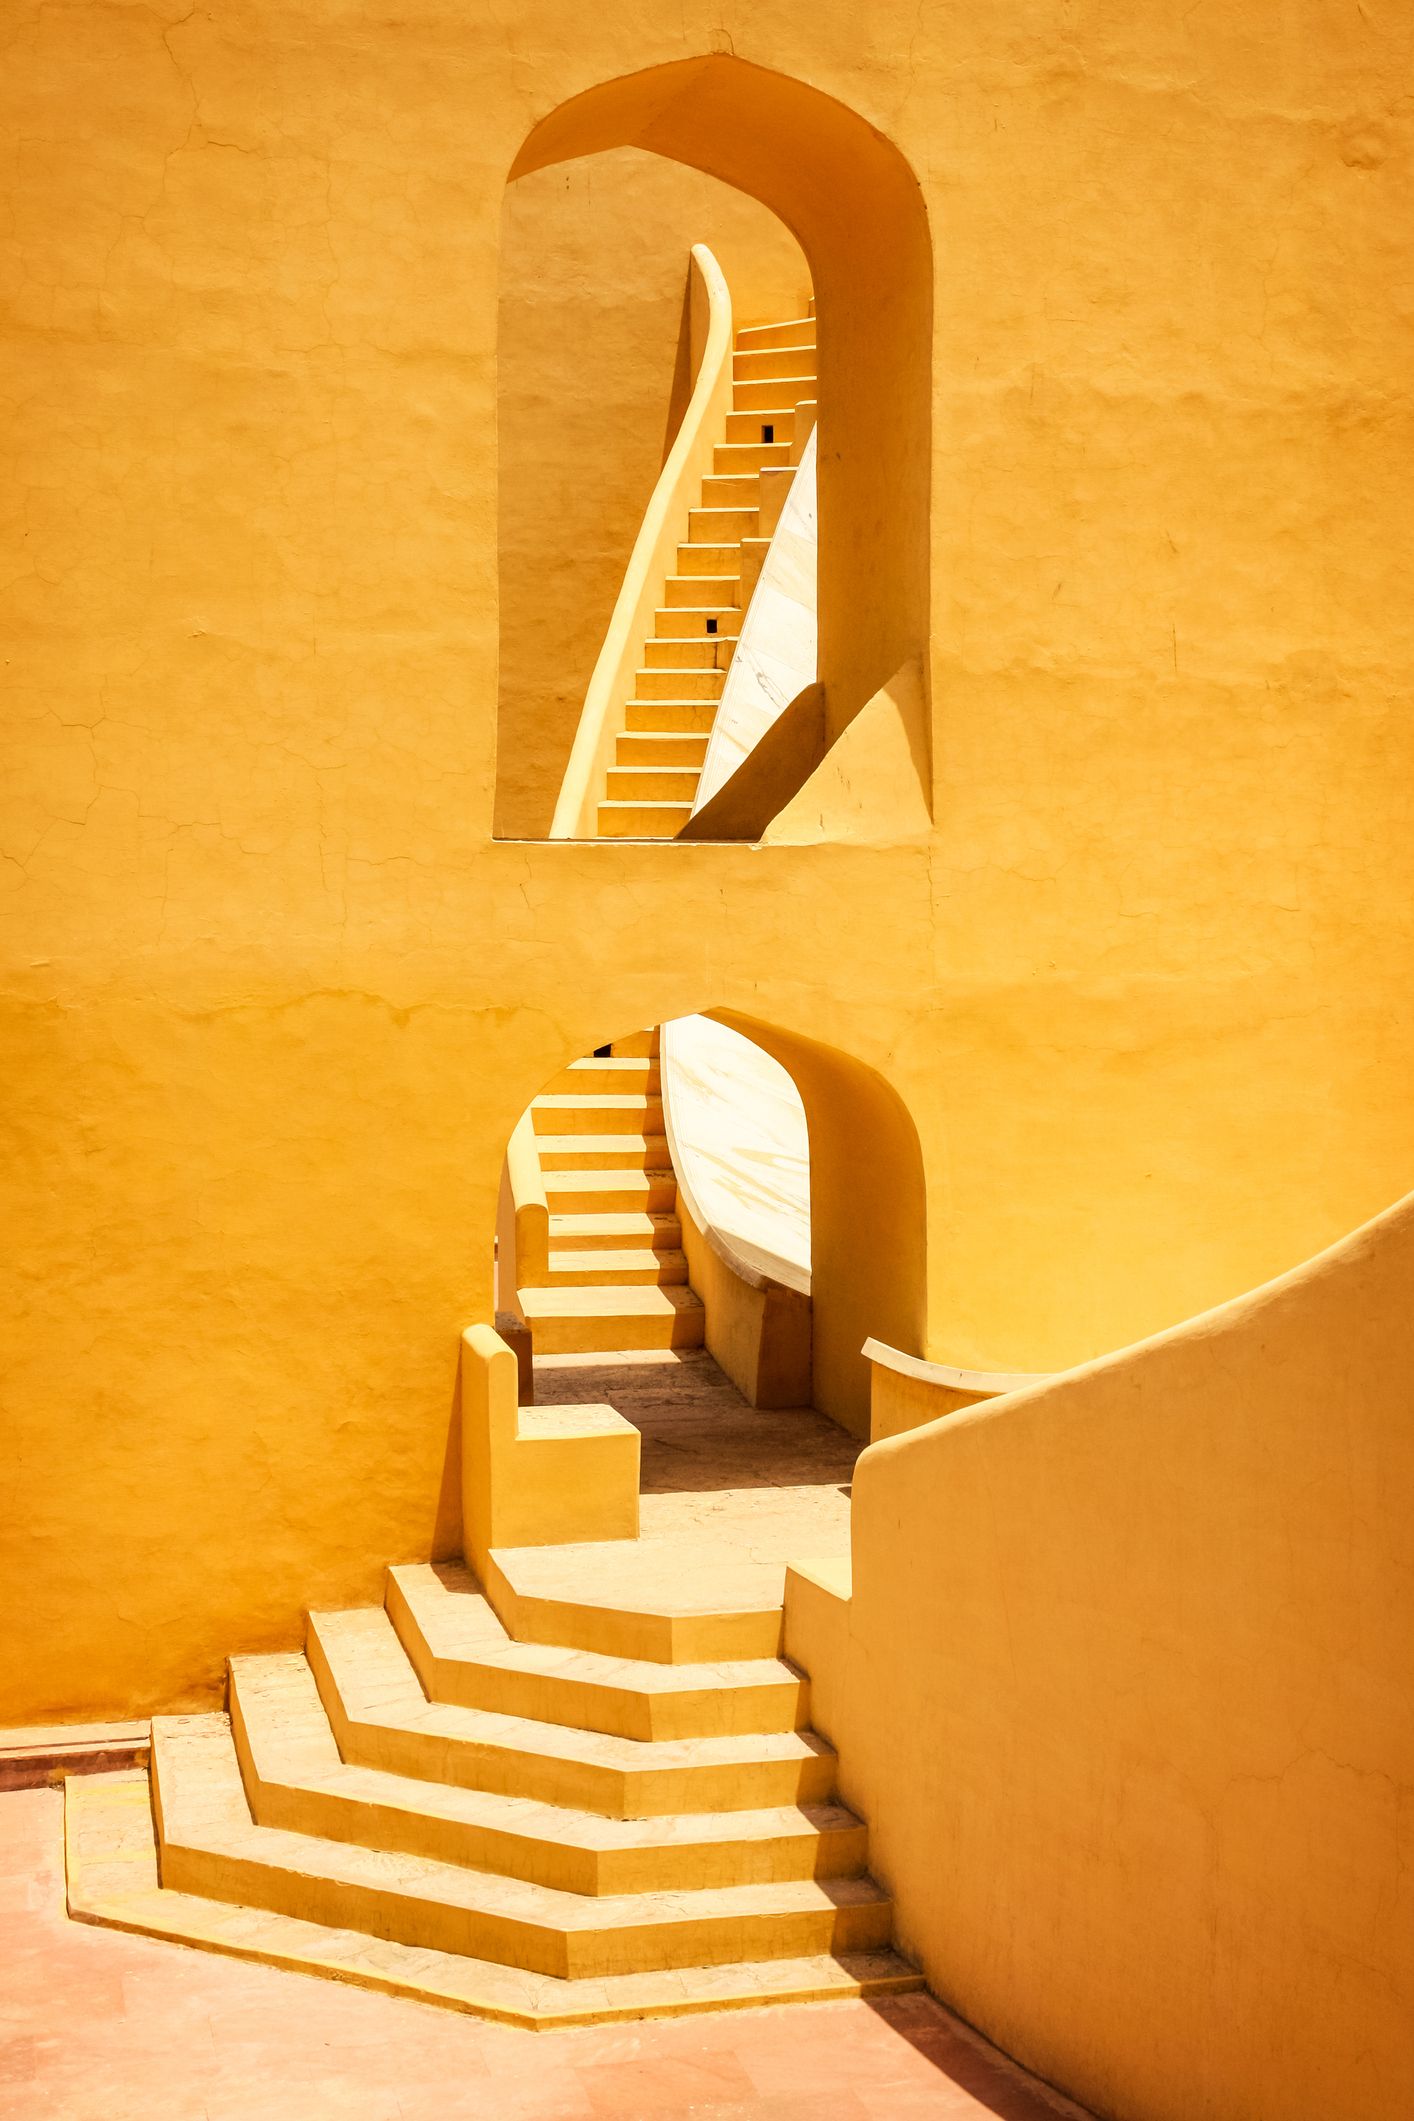 architectural detail photo of the jantar mantar monument in jaipur, rajasthan, india it is a collection of nineteen architectural astronomical instruments built in 1734